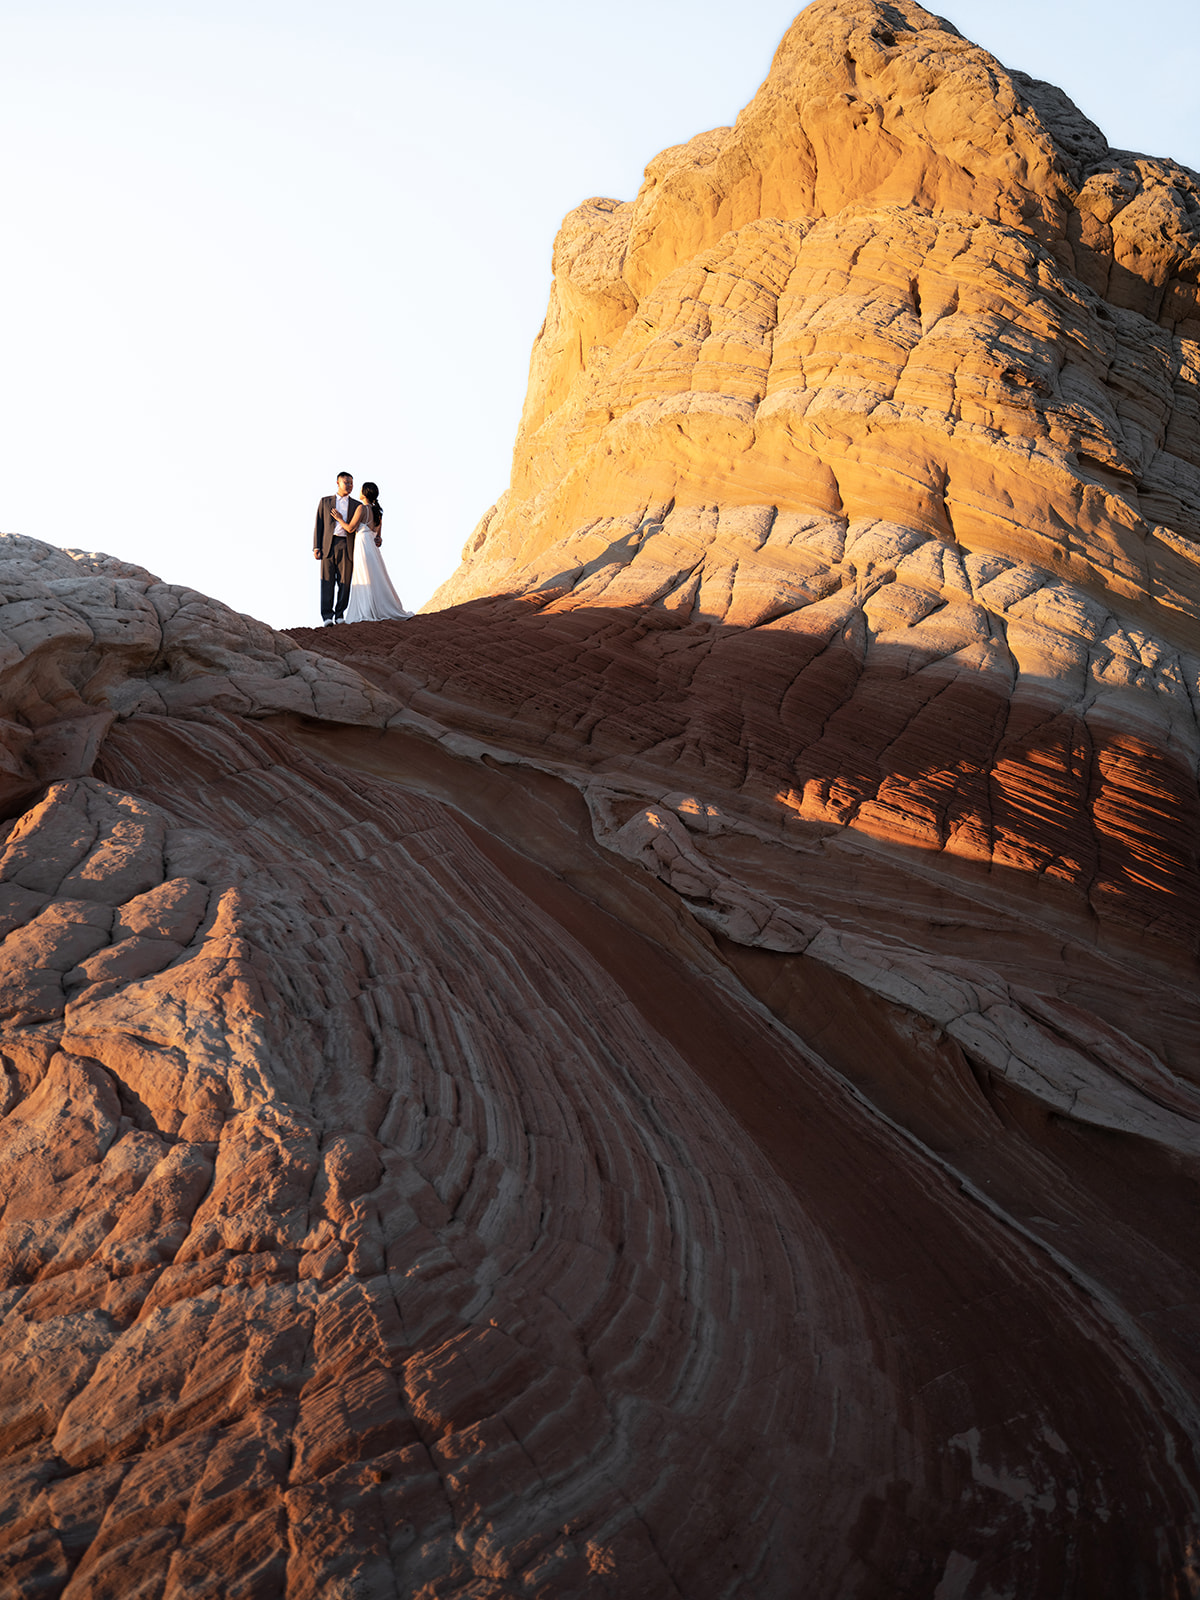 Couple celebrating their elopement surrounded by beautiful sandstone formations in White Pocket, Arizona